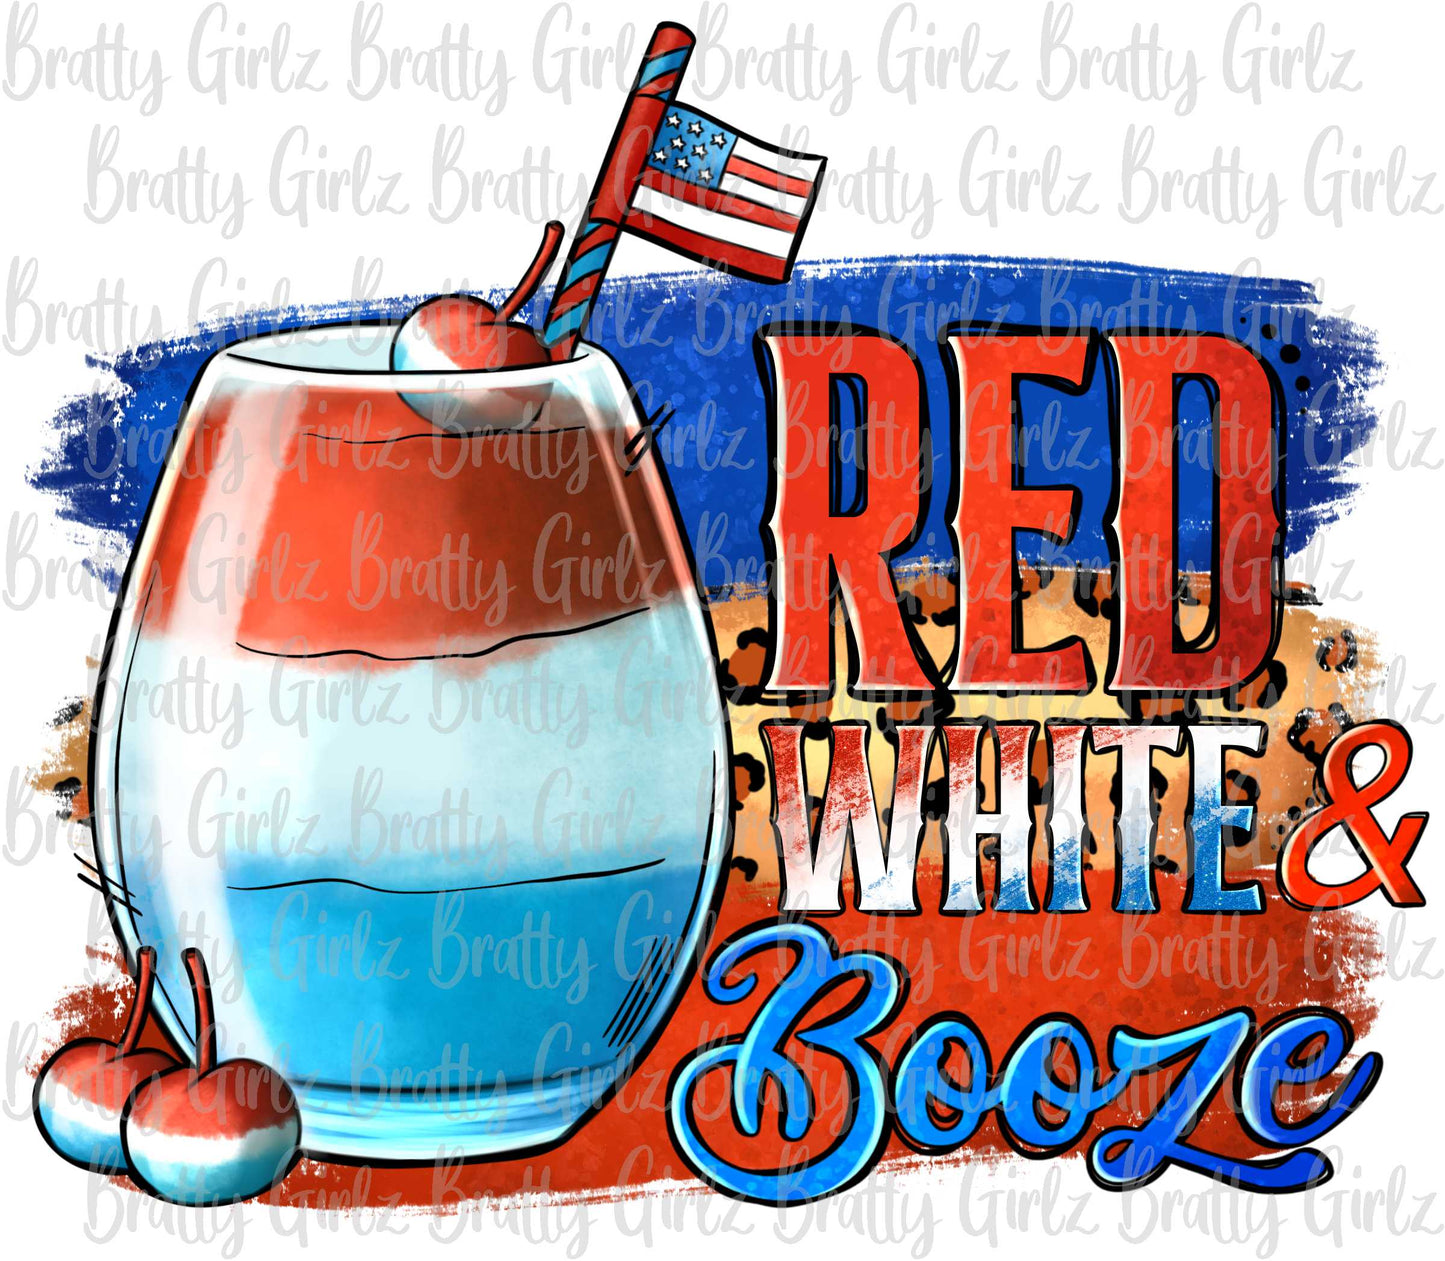 Red White and Booze